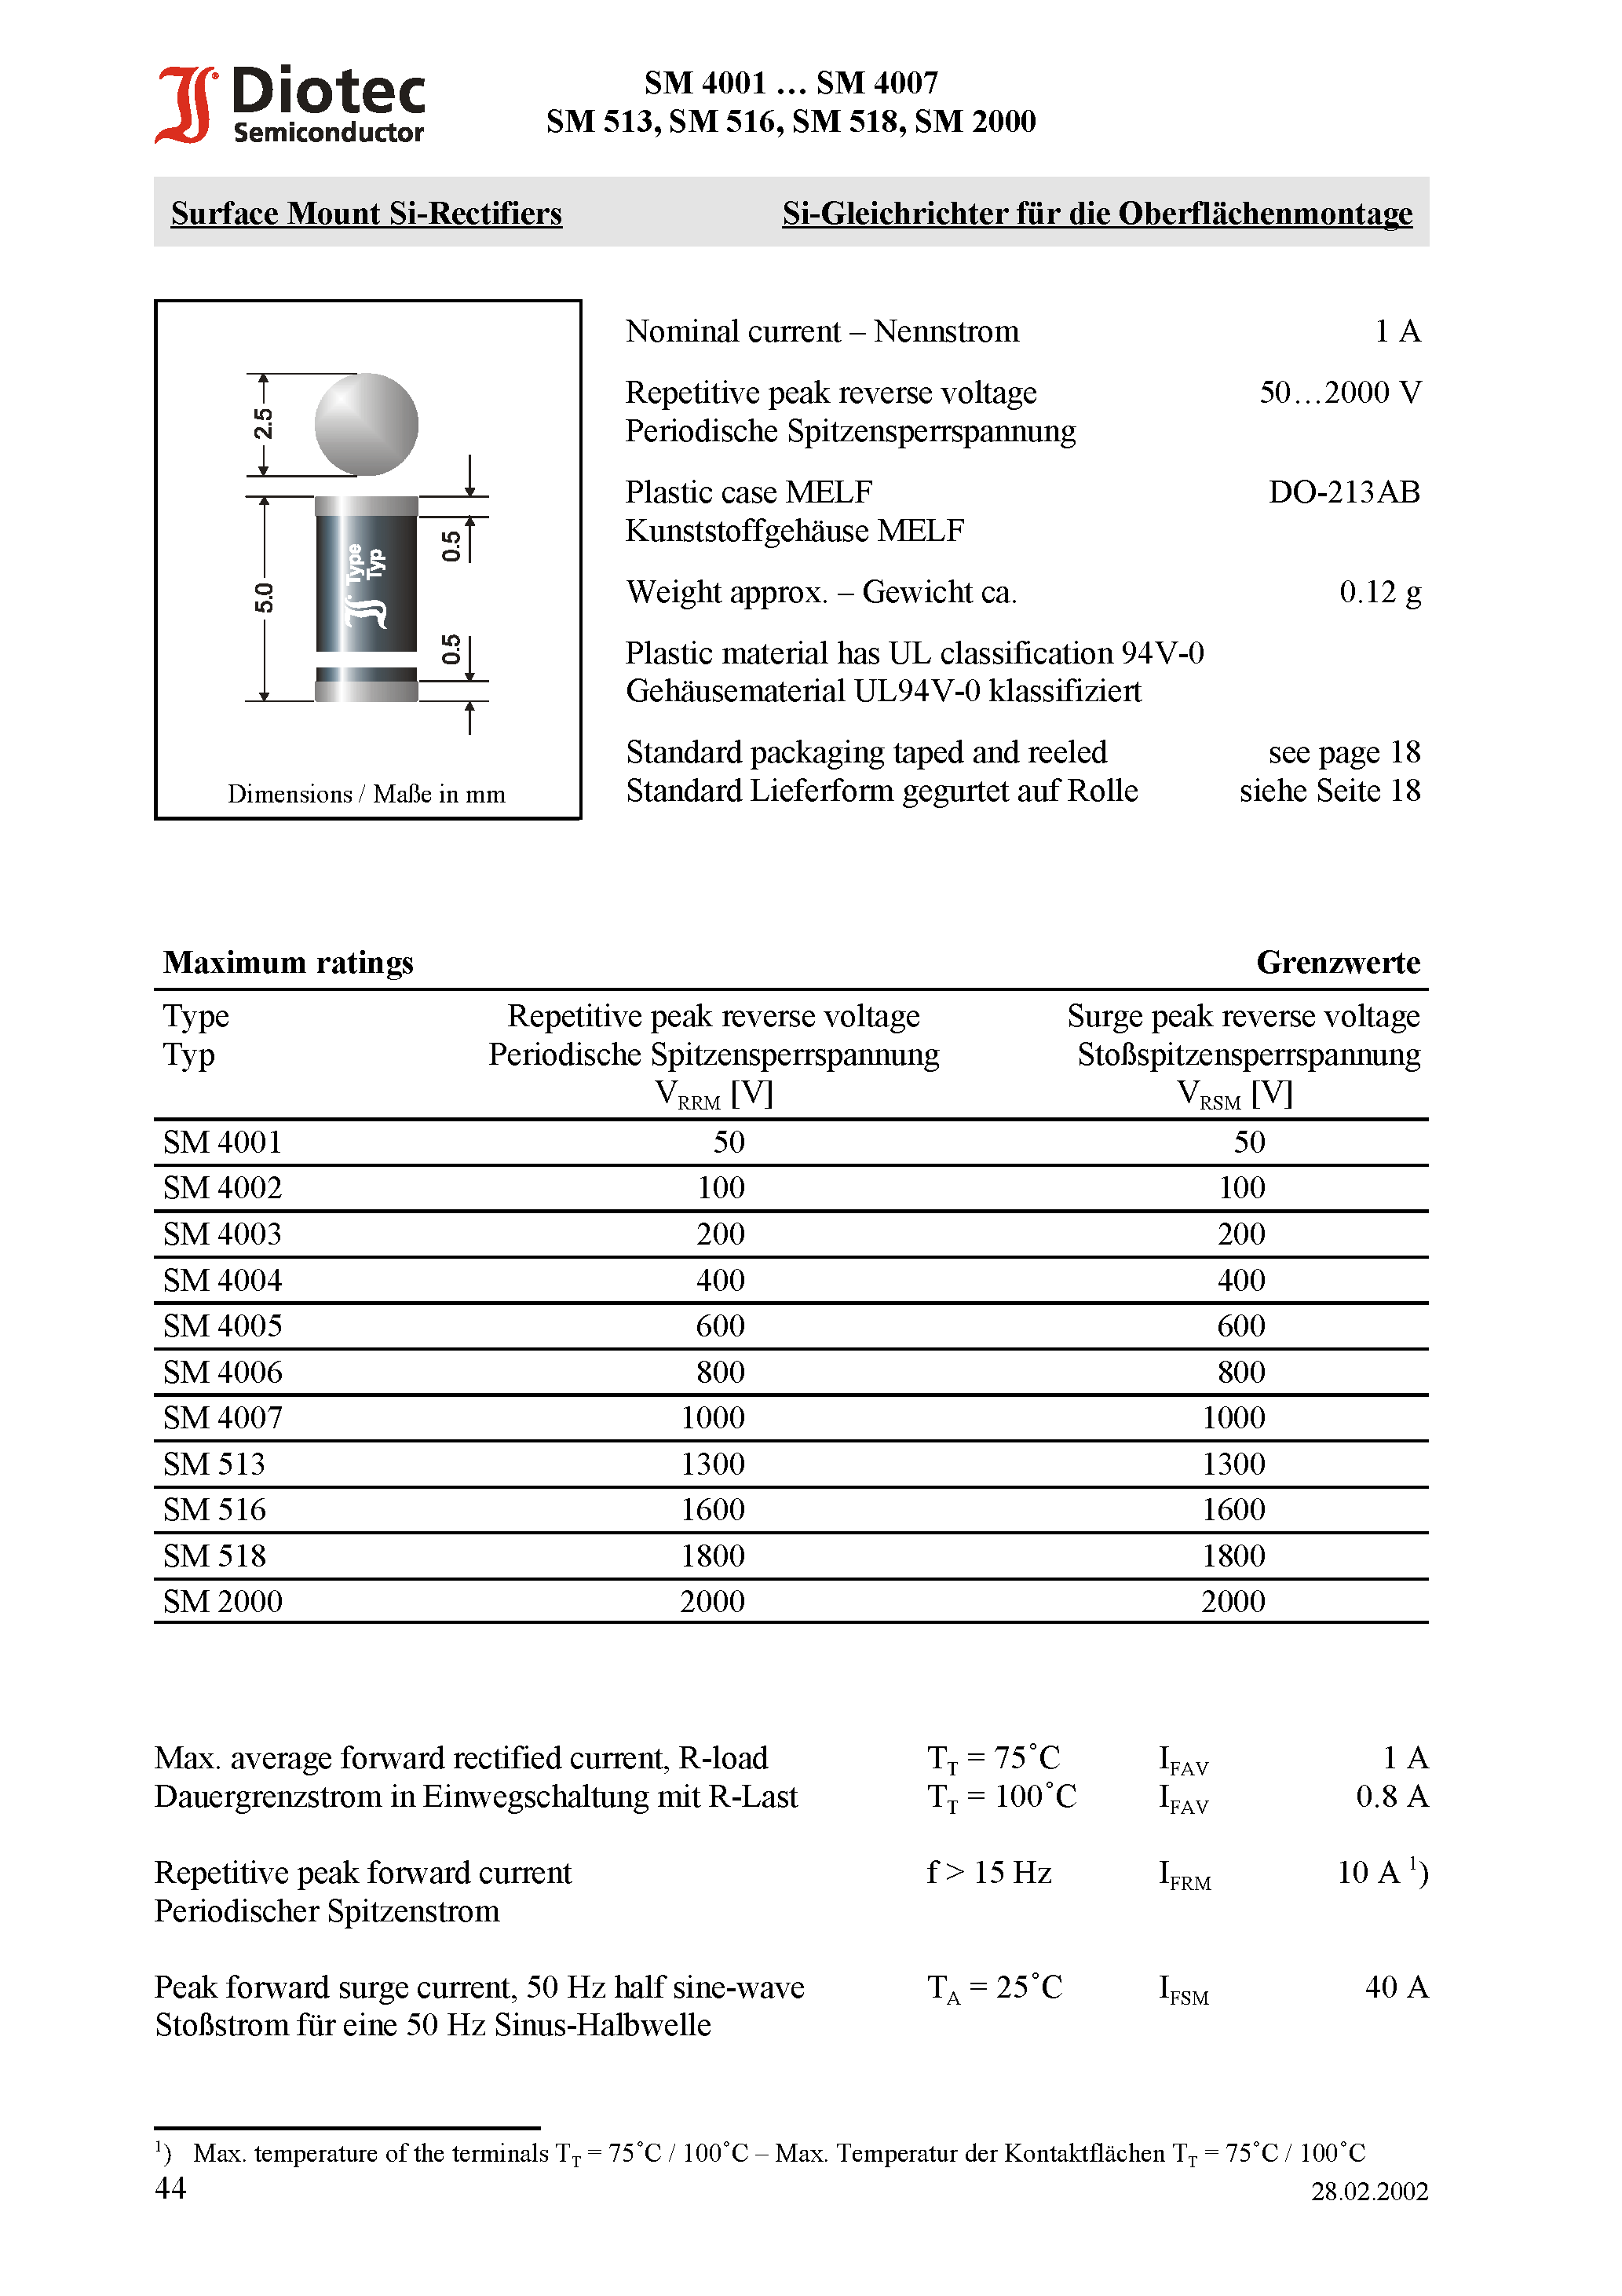 Даташит SM4001 - Surface Mount Si-Rectifiers страница 1